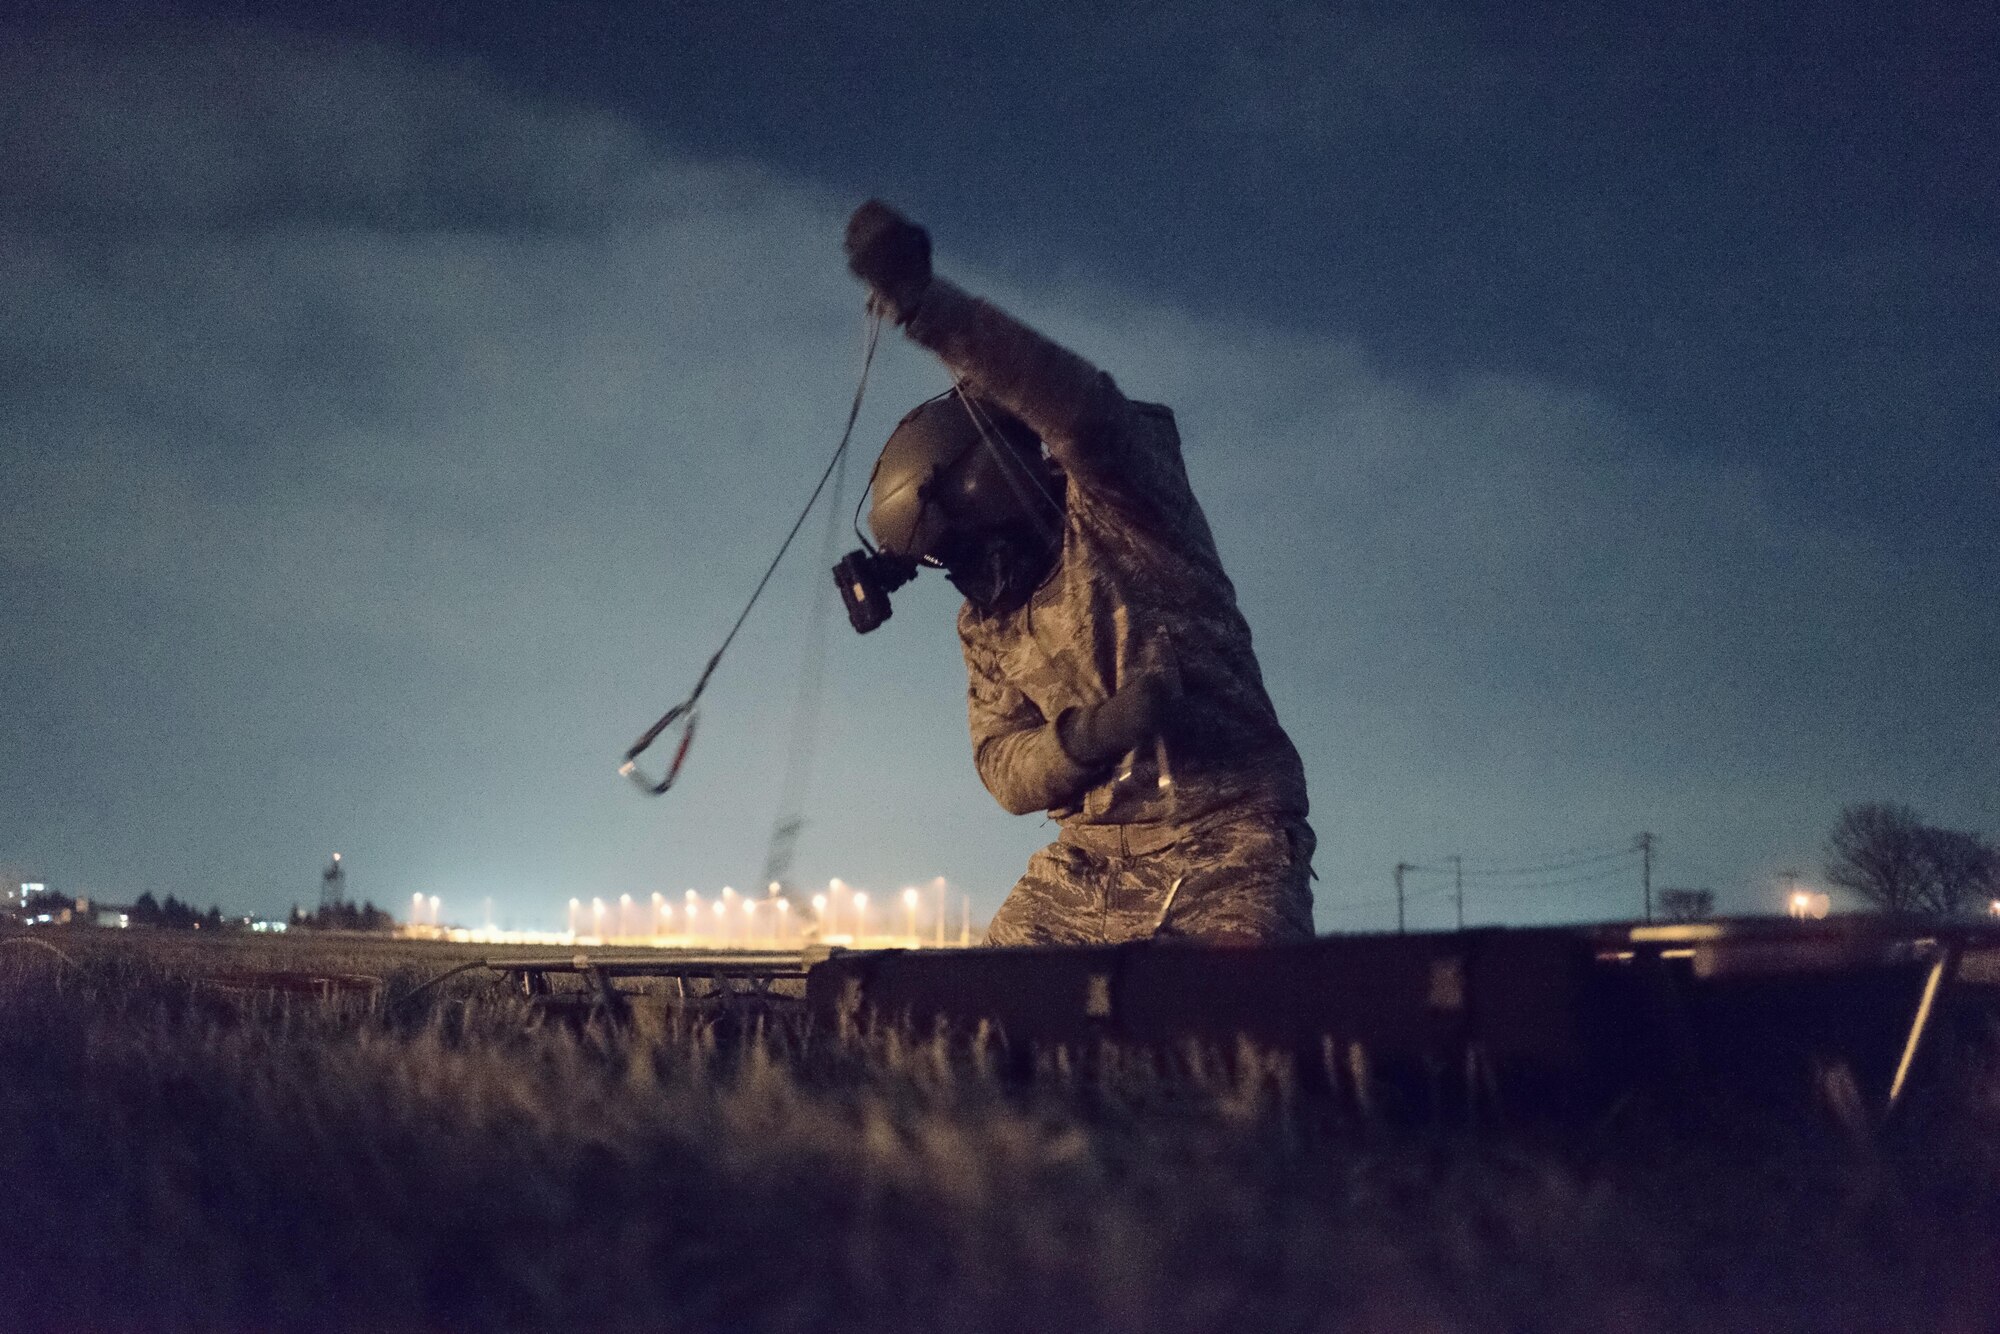 Tech. Sgt. Michael Wright, 459th Airlift Squadron UH-1N Huey flight engineer, prepares stokes litter for hoisting at Yokota Air Base, Japan, Feb. 23, 2016. The 459th AS recently improved their search and rescue capabilities by outfitting two UH-1N Hueys with new rescue hoists. Previously, without the hoist, conducting rescues in small, tight areas wasn’t feasible. Now, 459th AS aircrew can conduct any type of search and rescue scenario throughout the Kanto Plains. (U.S. Air Force photo by Airman 1st Class Delano Scott/Released)